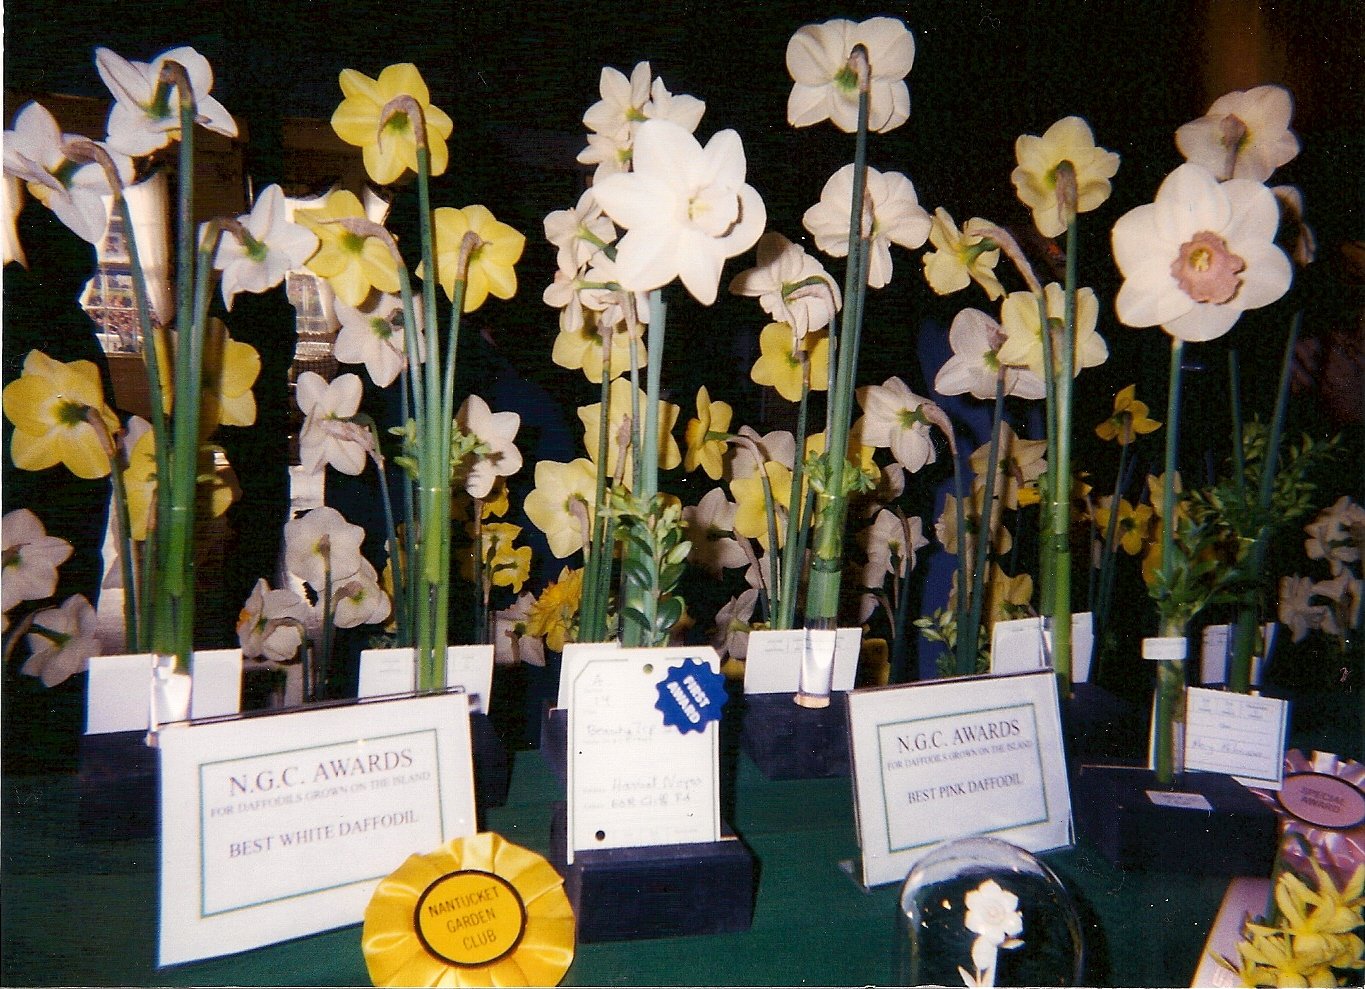 Some of the many Nantucket Daffodil Flower Show awards won by Grace Noyes.